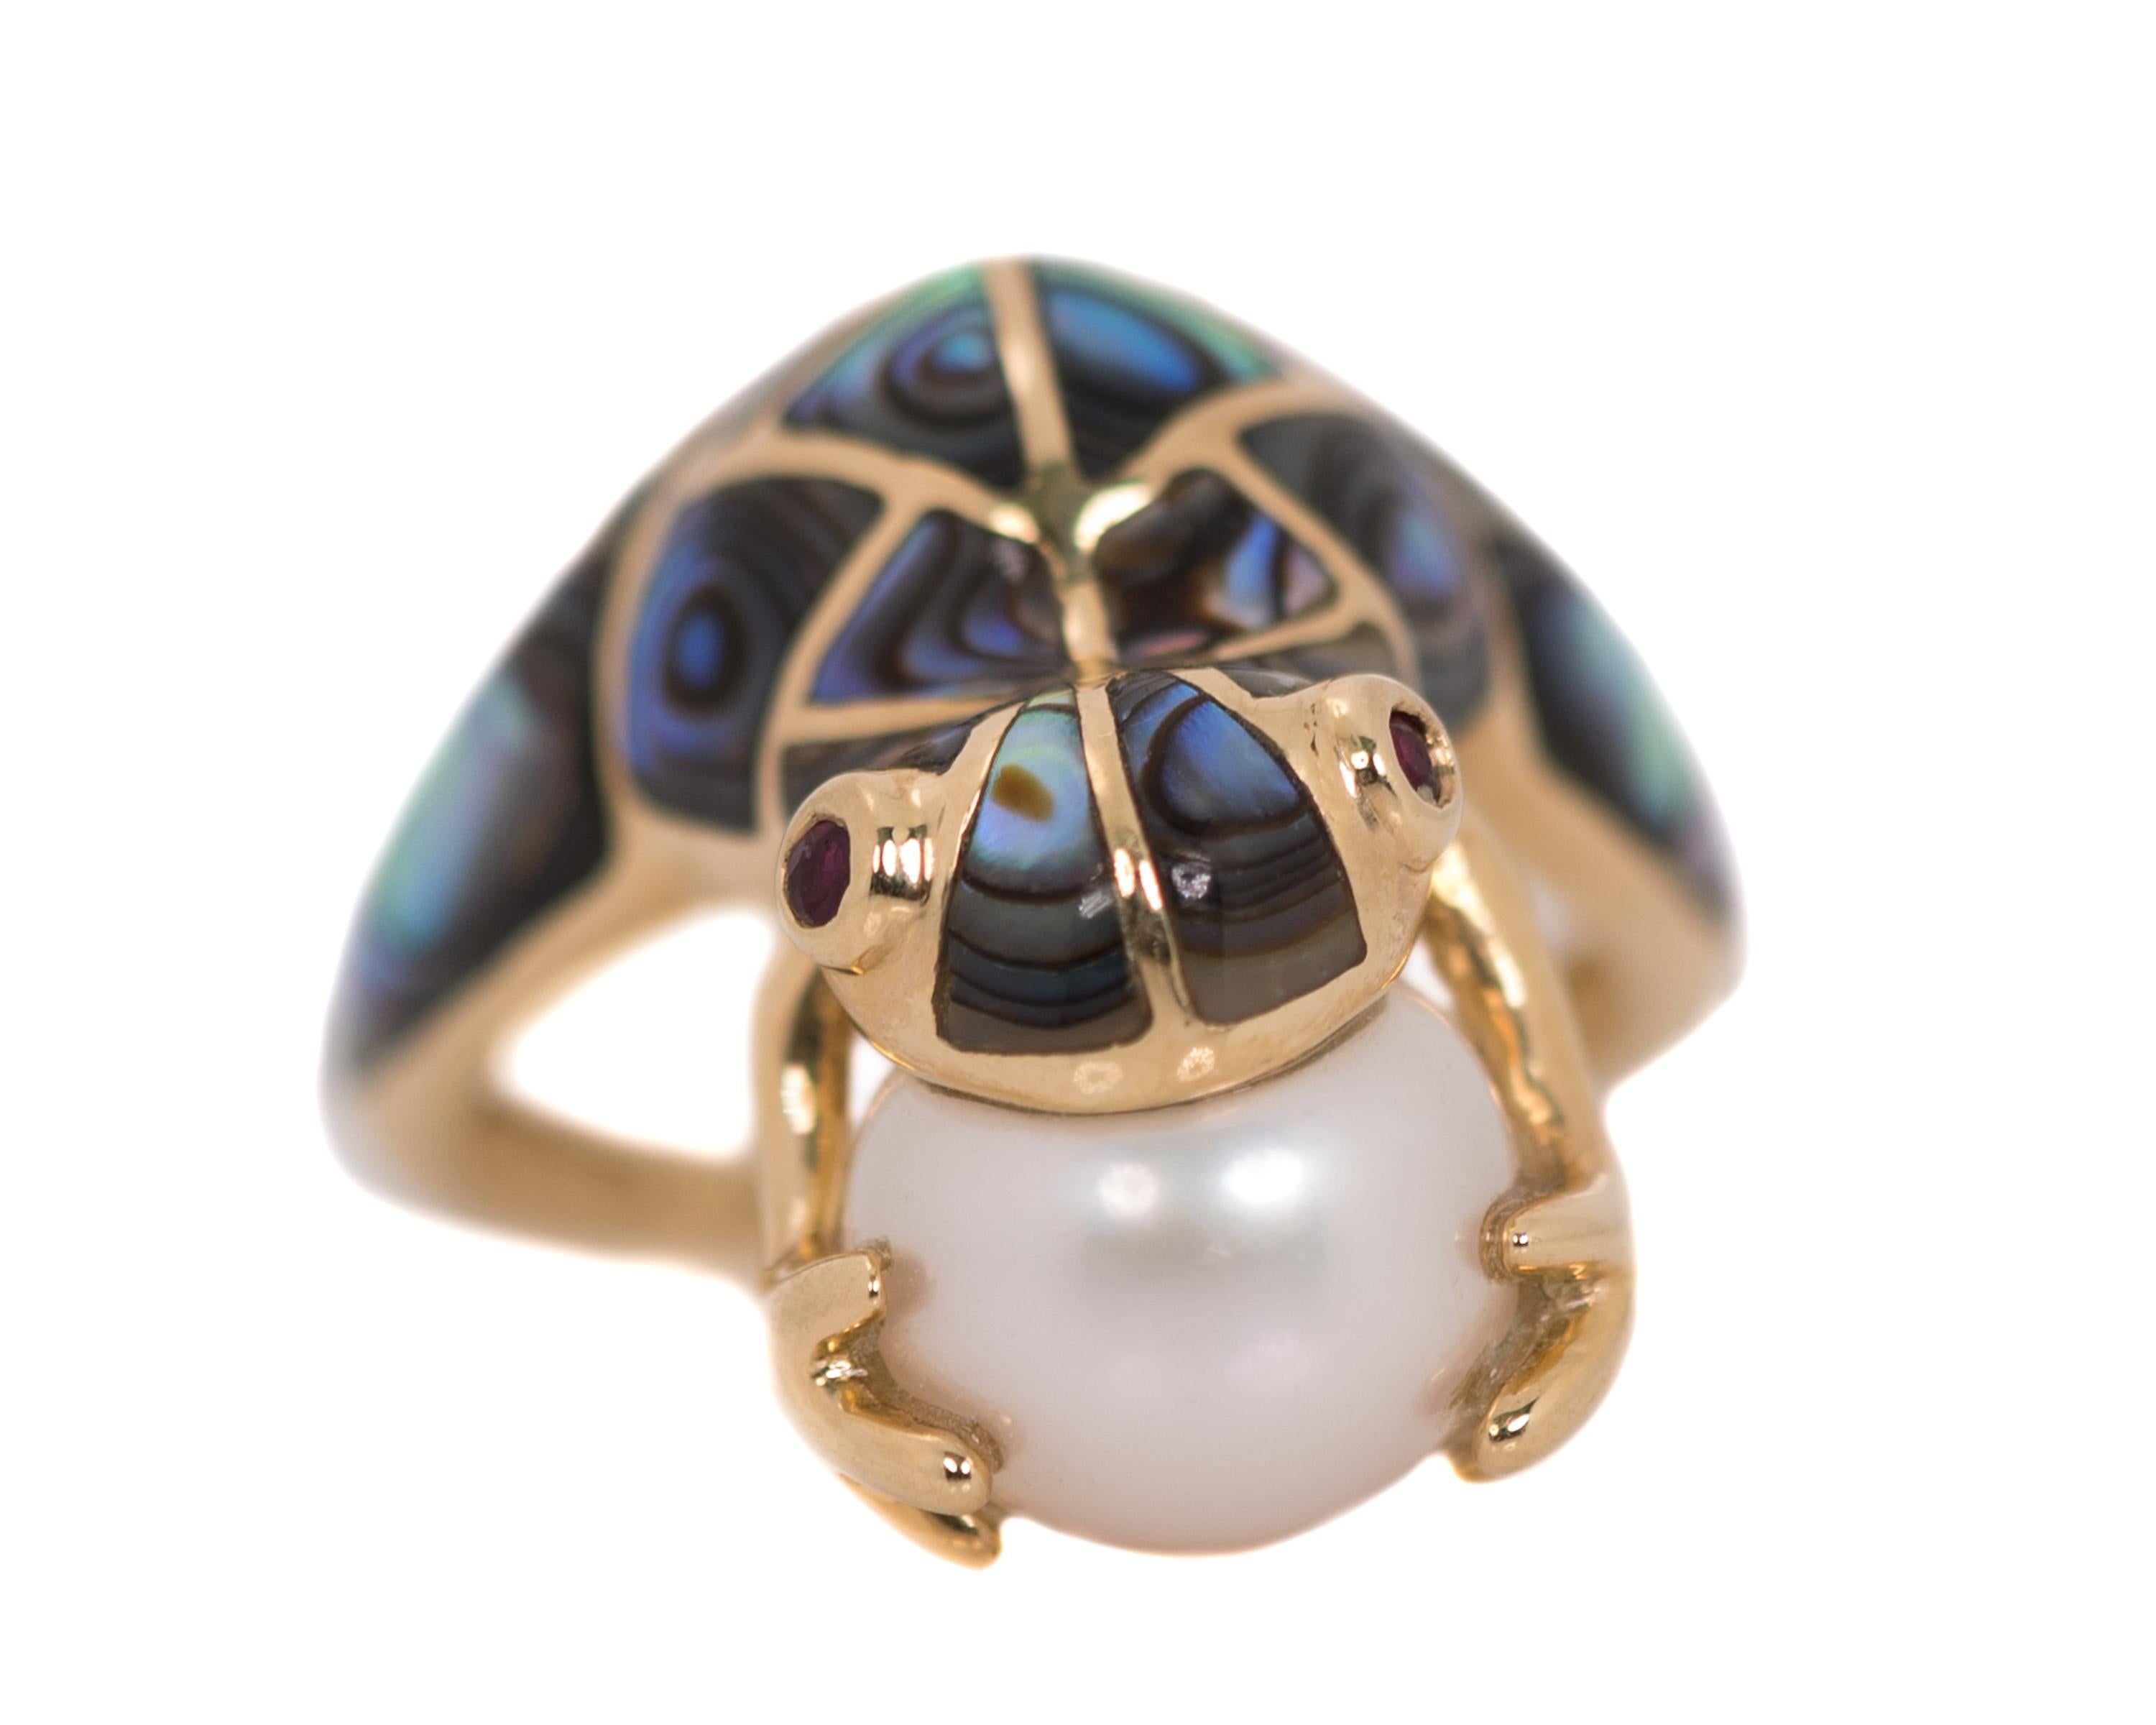 1990s Frog Ring - 14 Karat Yellow Gold, Abalone, Pearl, Ruby

Features:
10 millimeter cultured Pearl
Abalone inlay Frog body and back legs (front half of ring shank)
14 Karat Yellow Gold setting
14 Karat Yellow Gold Frog front legs
2 Ruby eyes
14